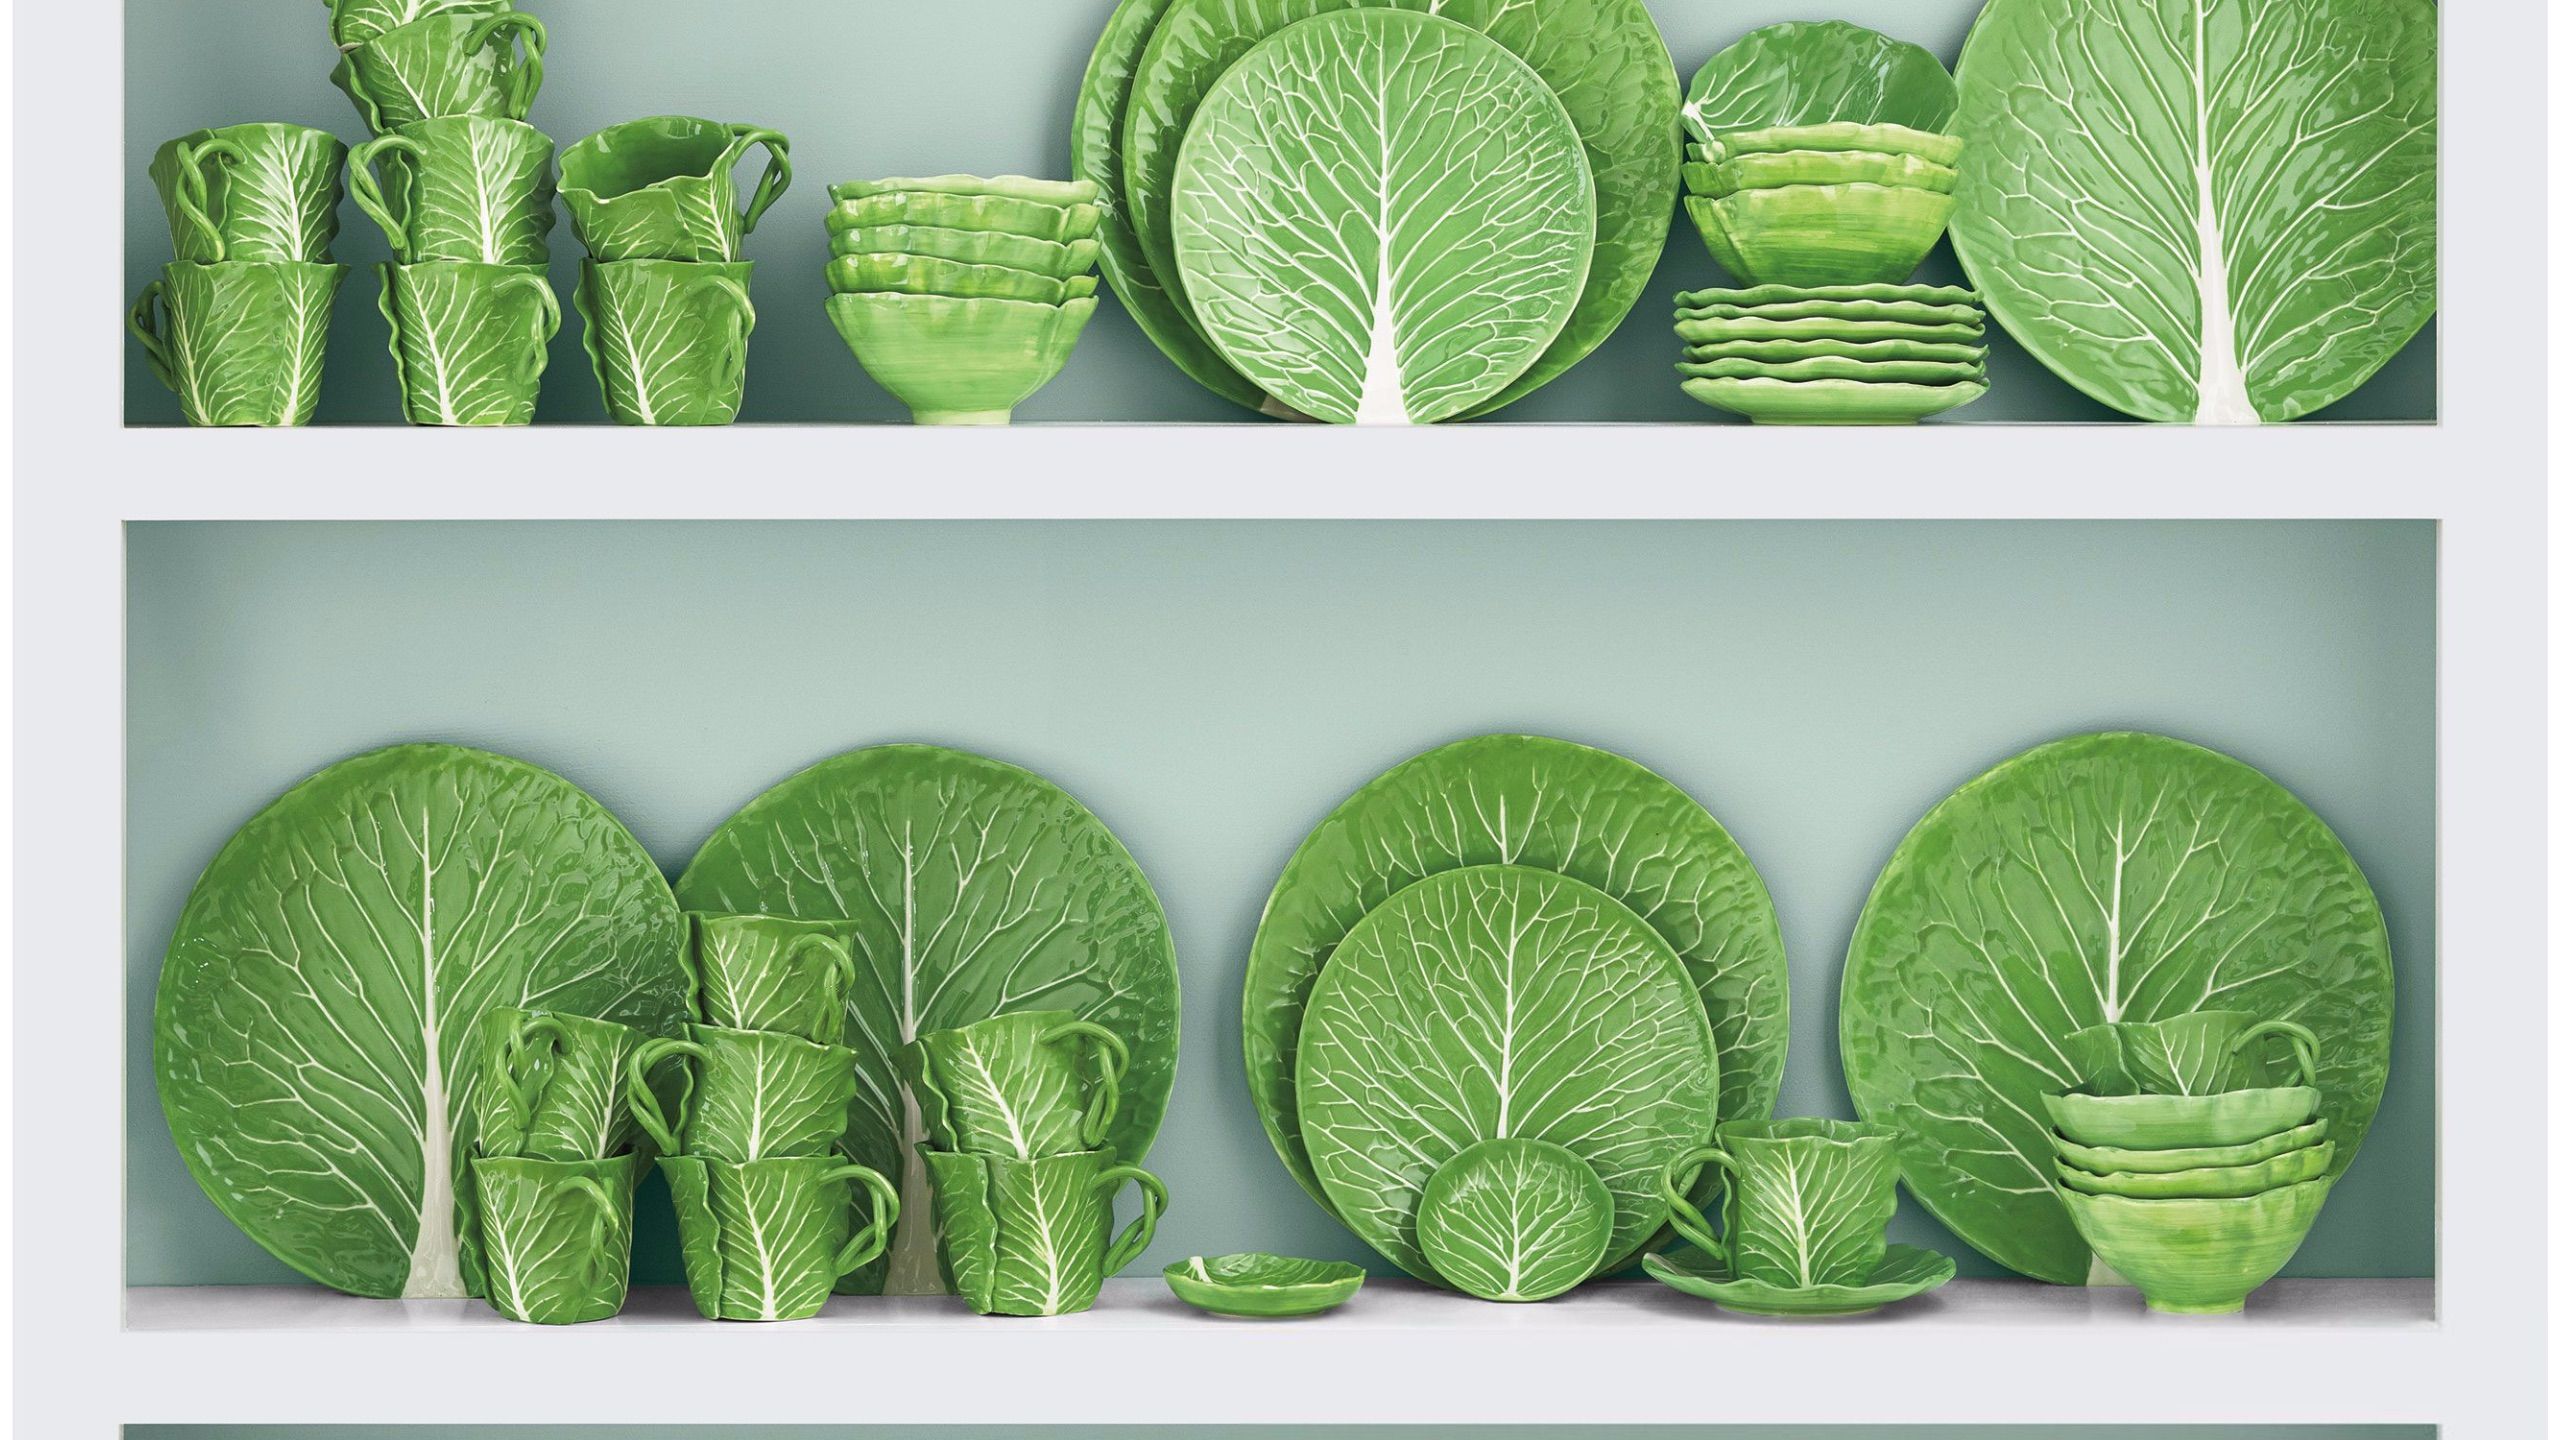 Tory Burch's New Lettuce-Ware - Vintage Pottery Sells Big At Auction